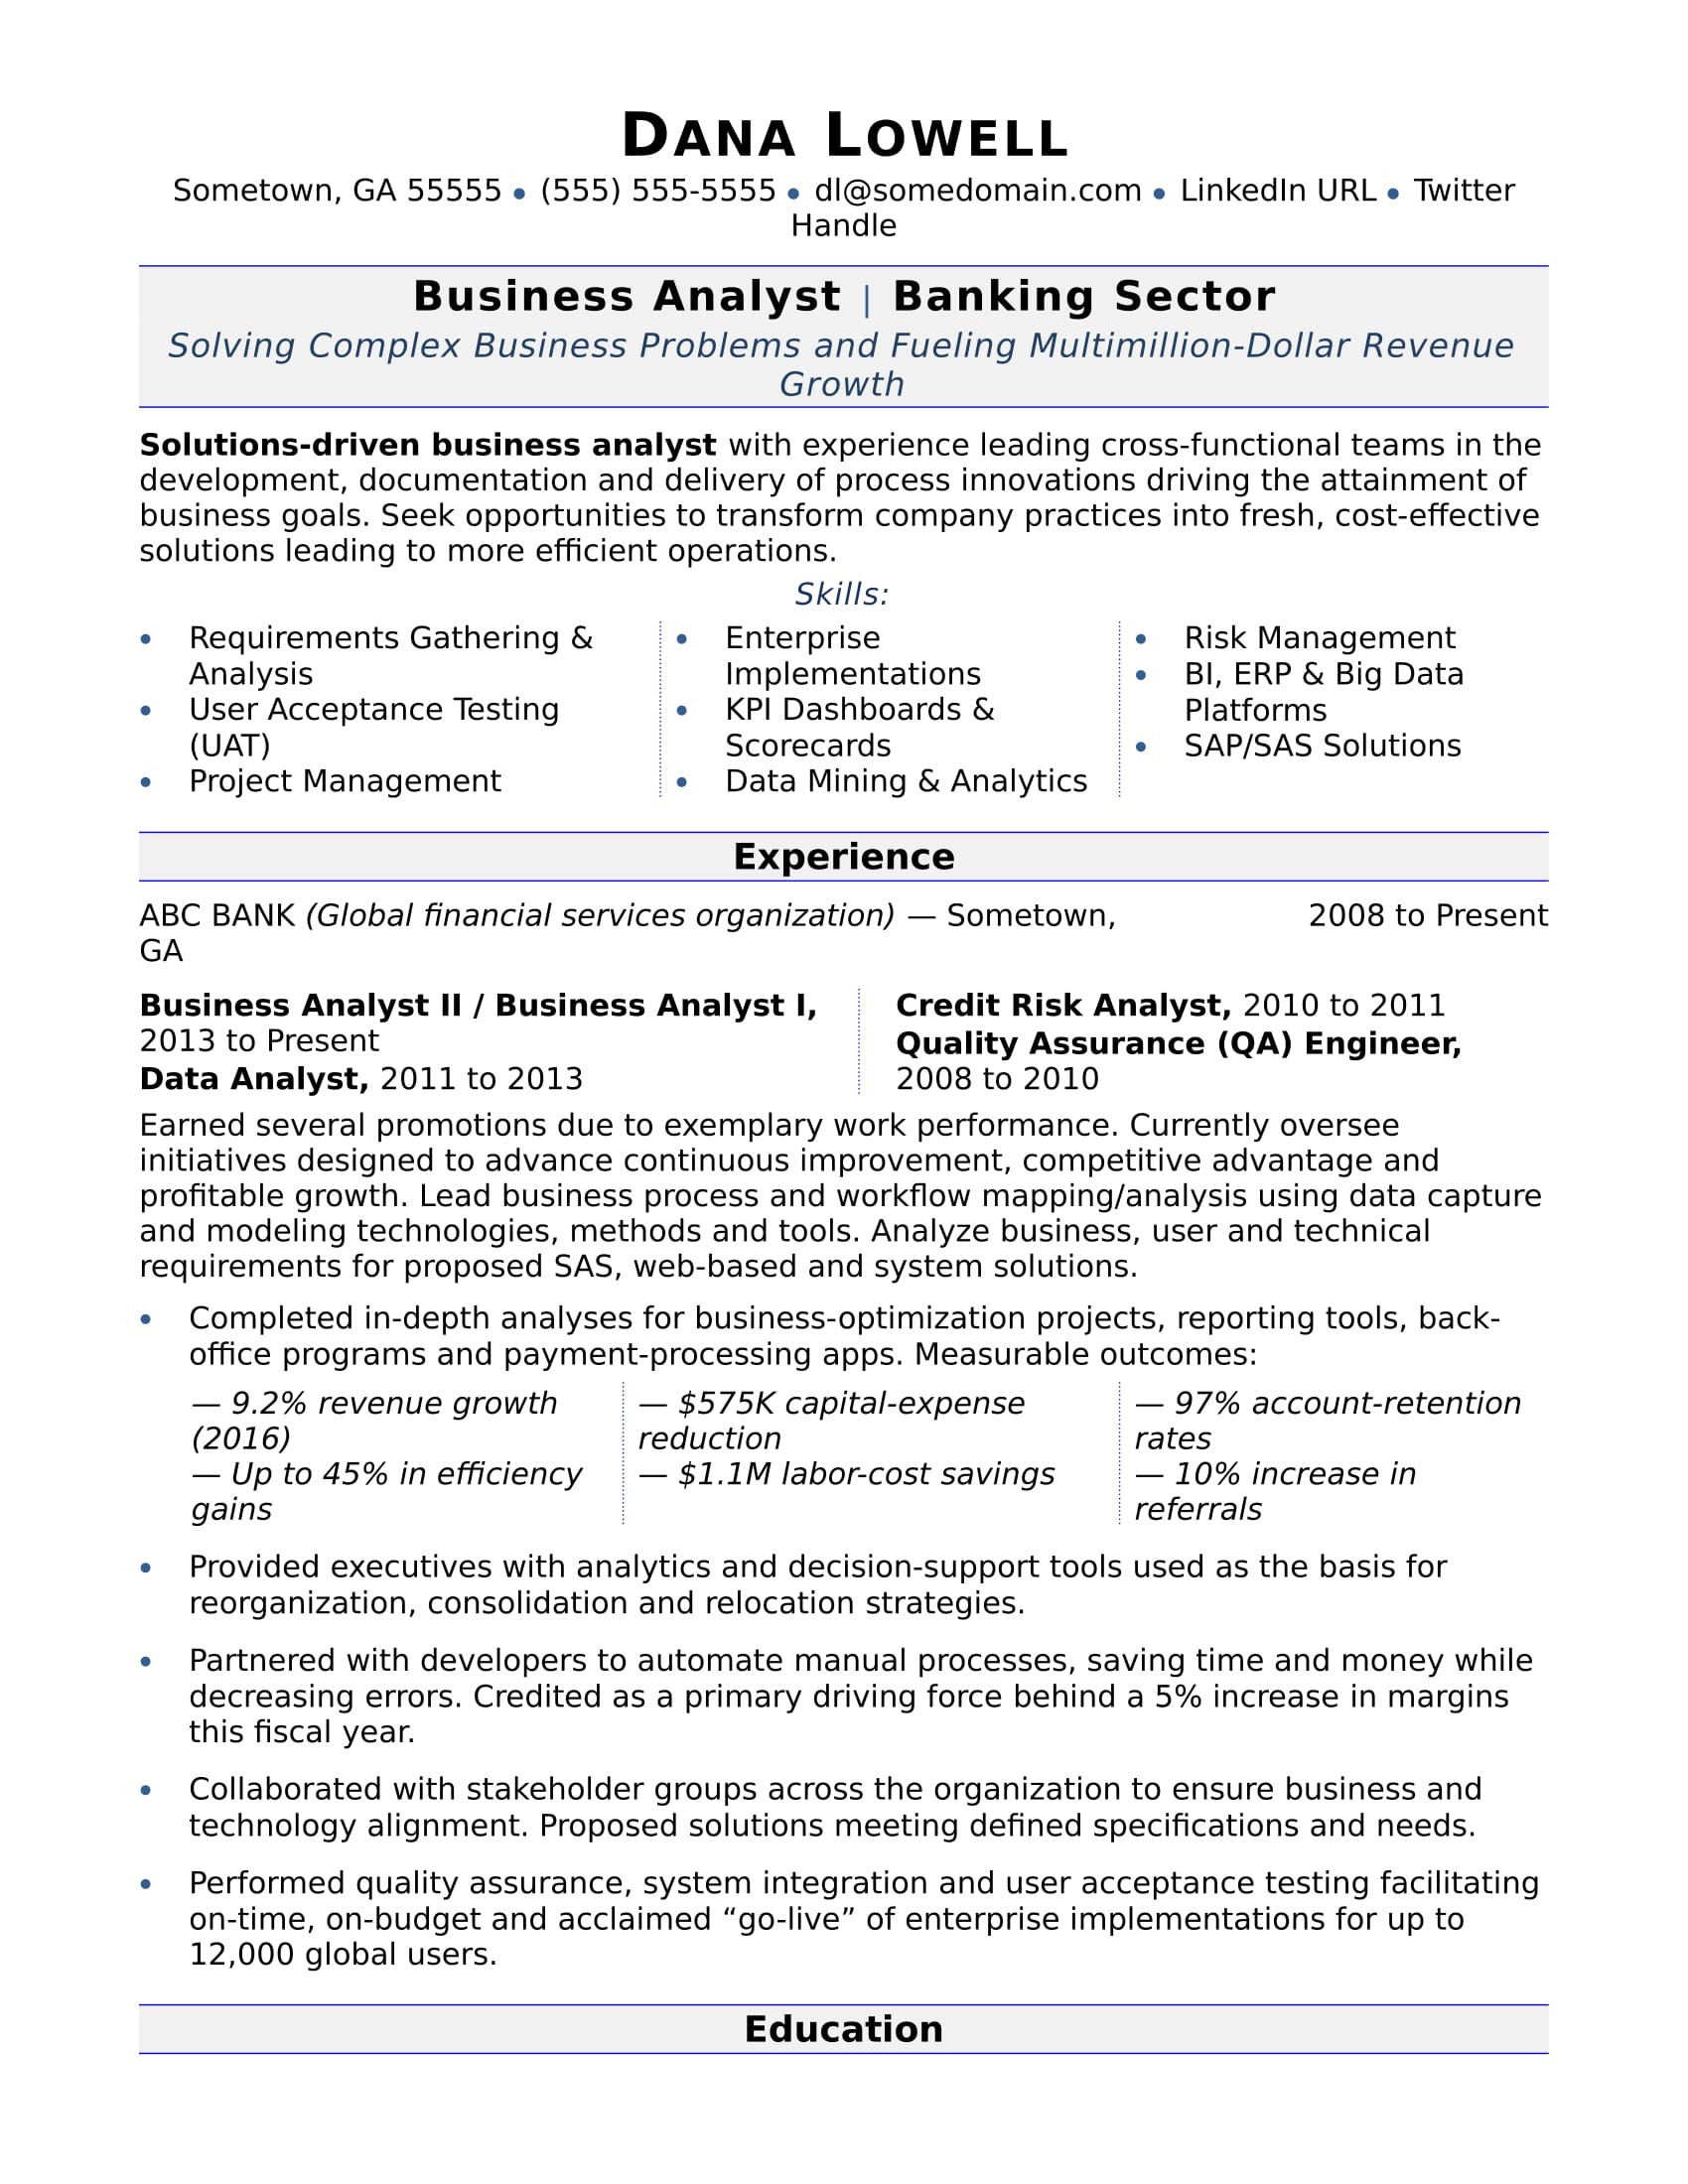 Busines System Analyst Resume Objective Samples Business Analyst Resume Monster.com